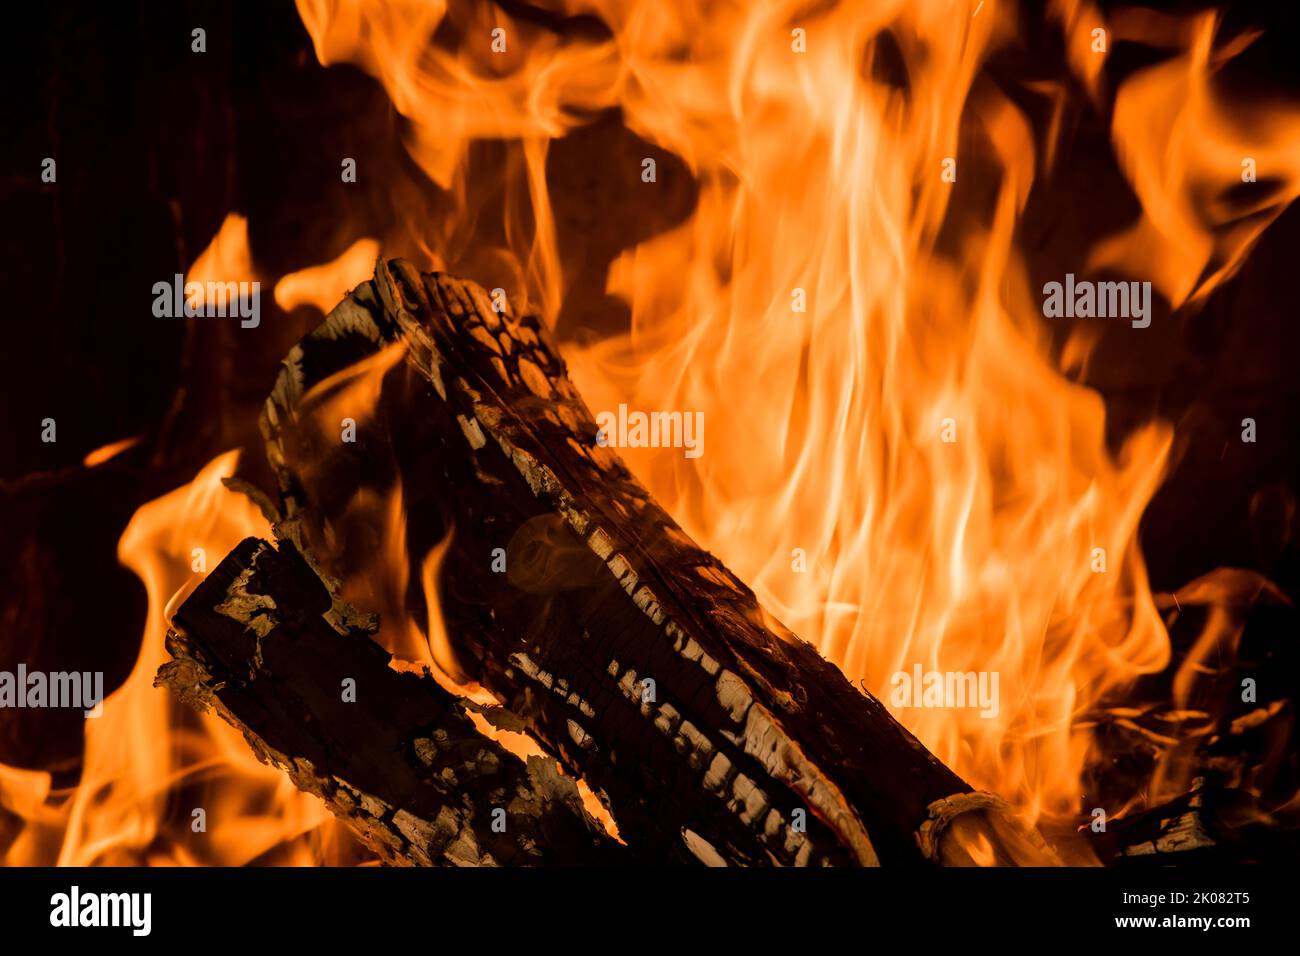 A wood-fired pizza oven is burning with flames it as a fire is burning Stock Photo